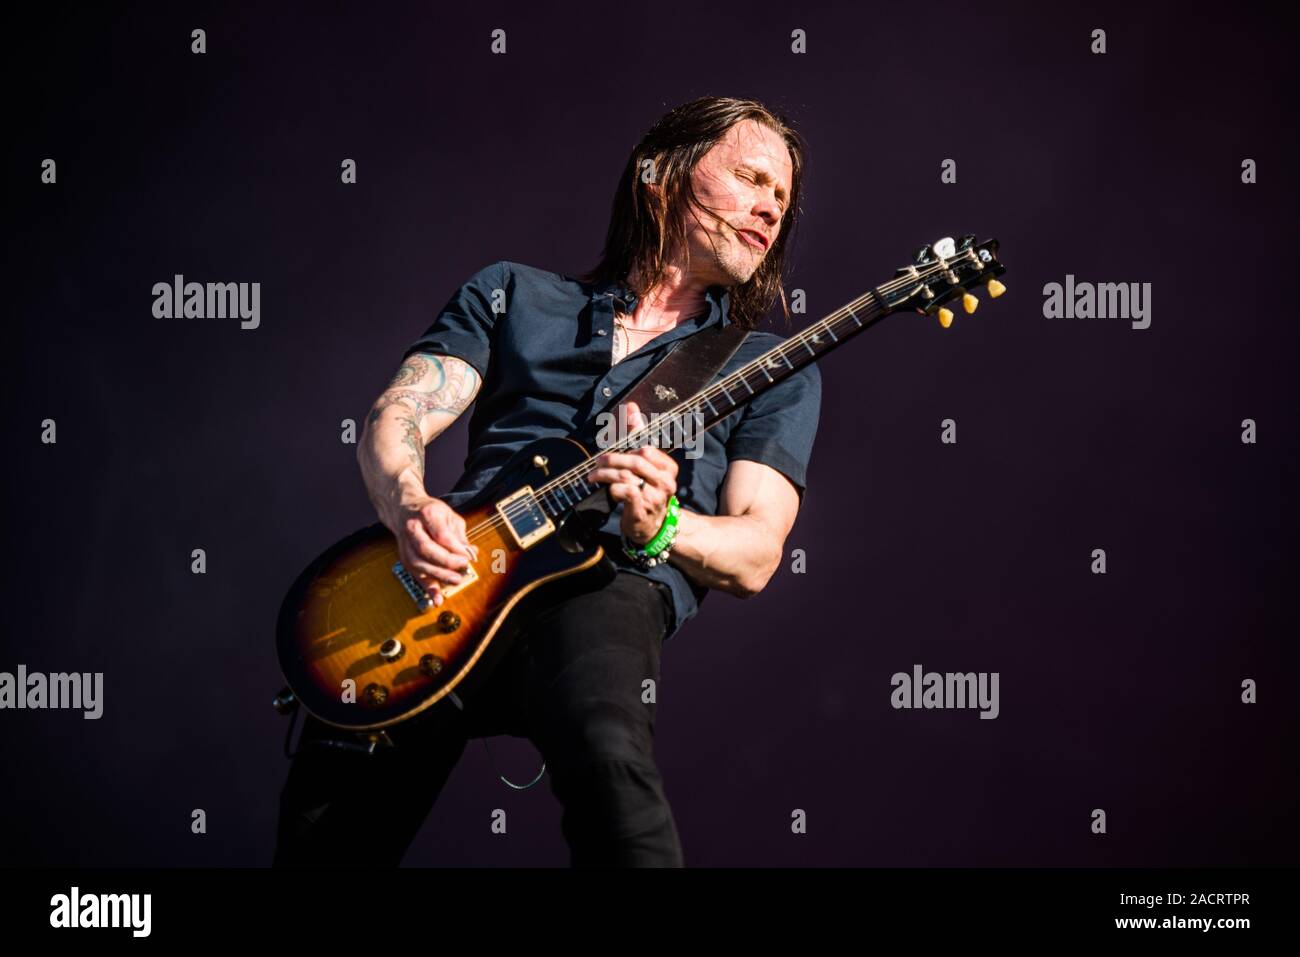 Air Guitar? Myles Kennedy Started Out in a Whole 'Air' Band